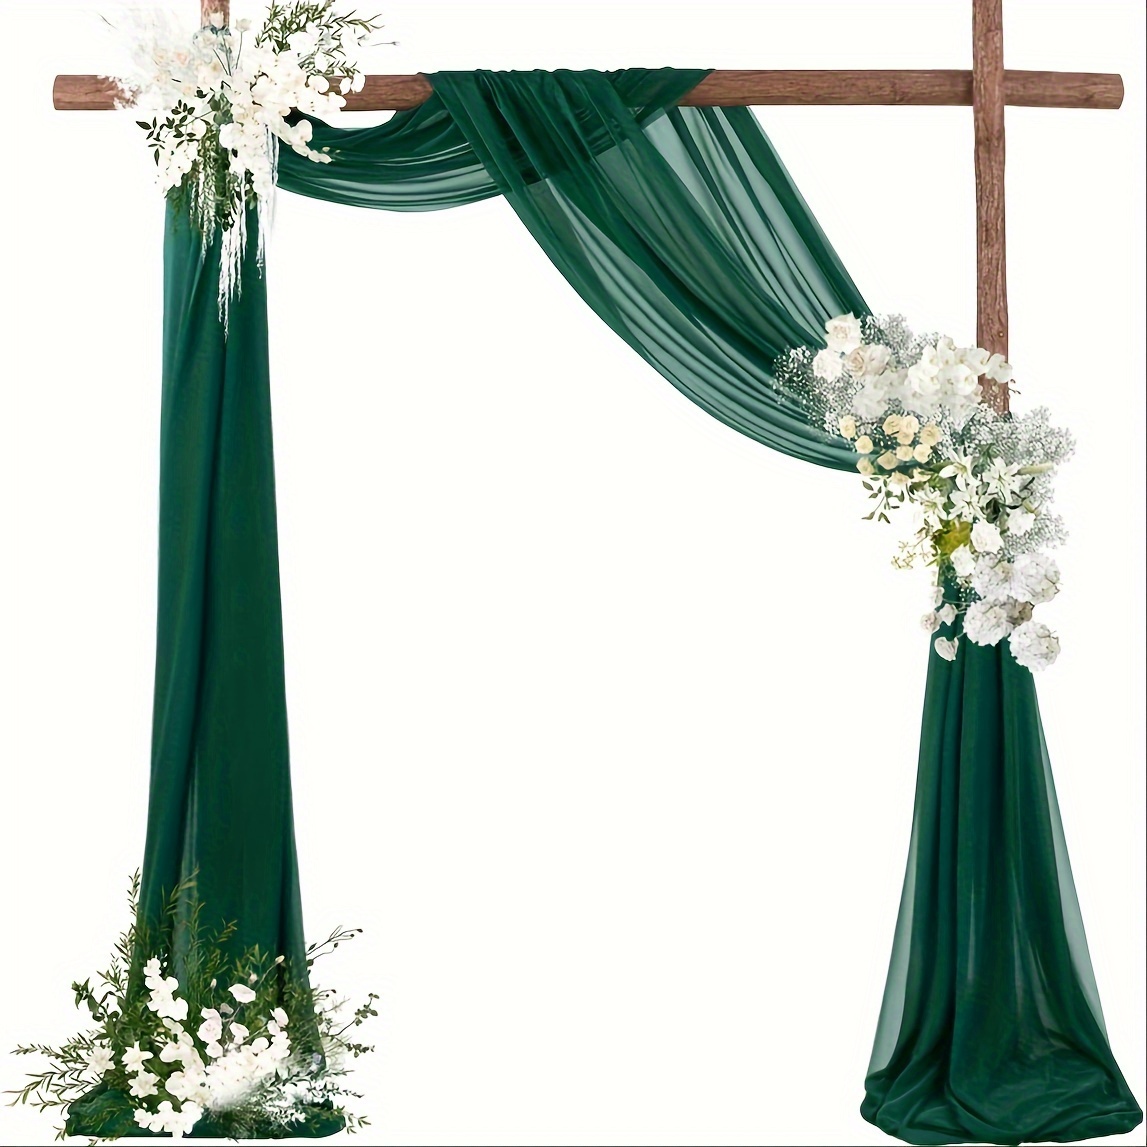 

Solid Hunter Green Polyester Table Runner - Elegant Wedding Arch Draping Fabric, Sheer Voile Curtain For Ceremony & Party Decor, Durable Woven Table Flag For Christmas Holiday Celebrations